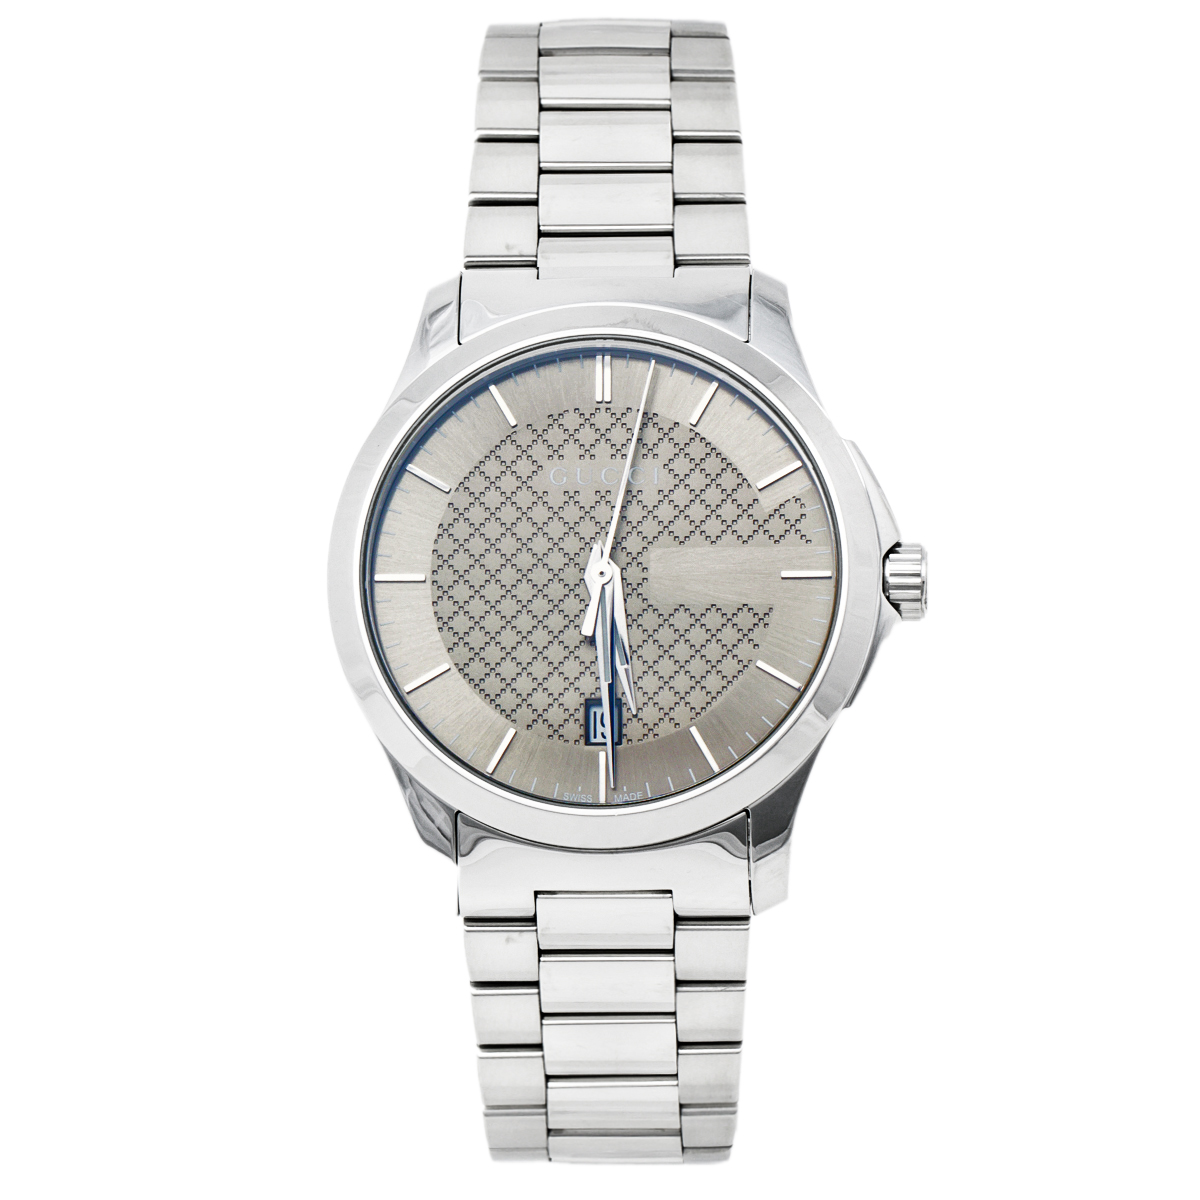 Gucci Silver Grey Stainless Steel G-Timeless 126.4 Men's Wristwatch 38 mm